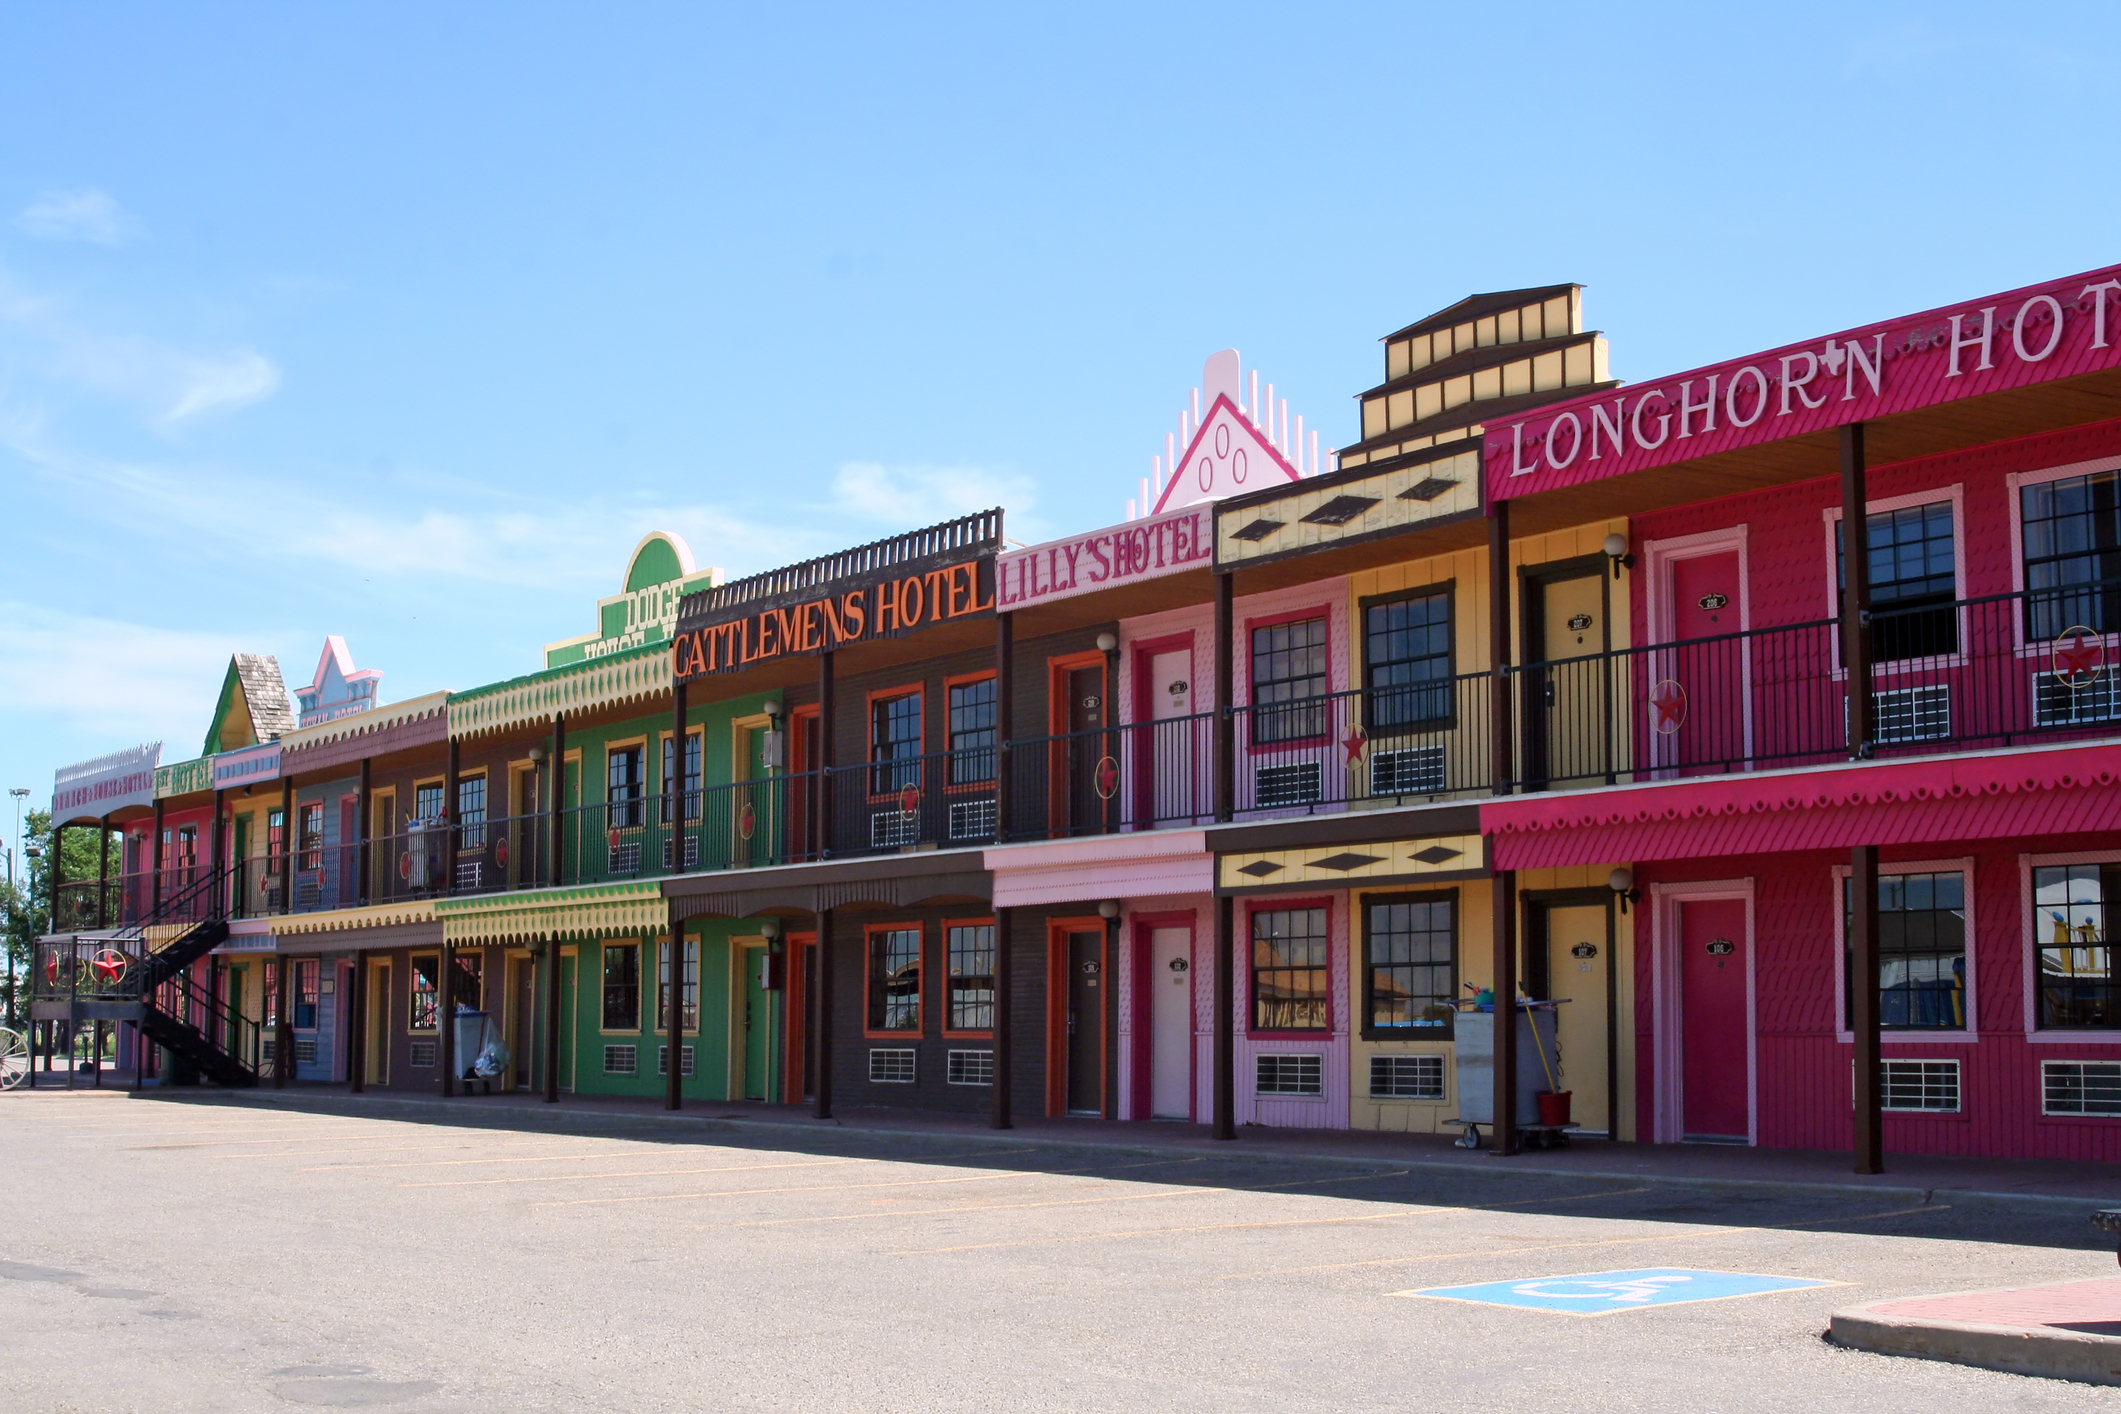 Street view of the Big Texan Motel, which looks like an old west street.